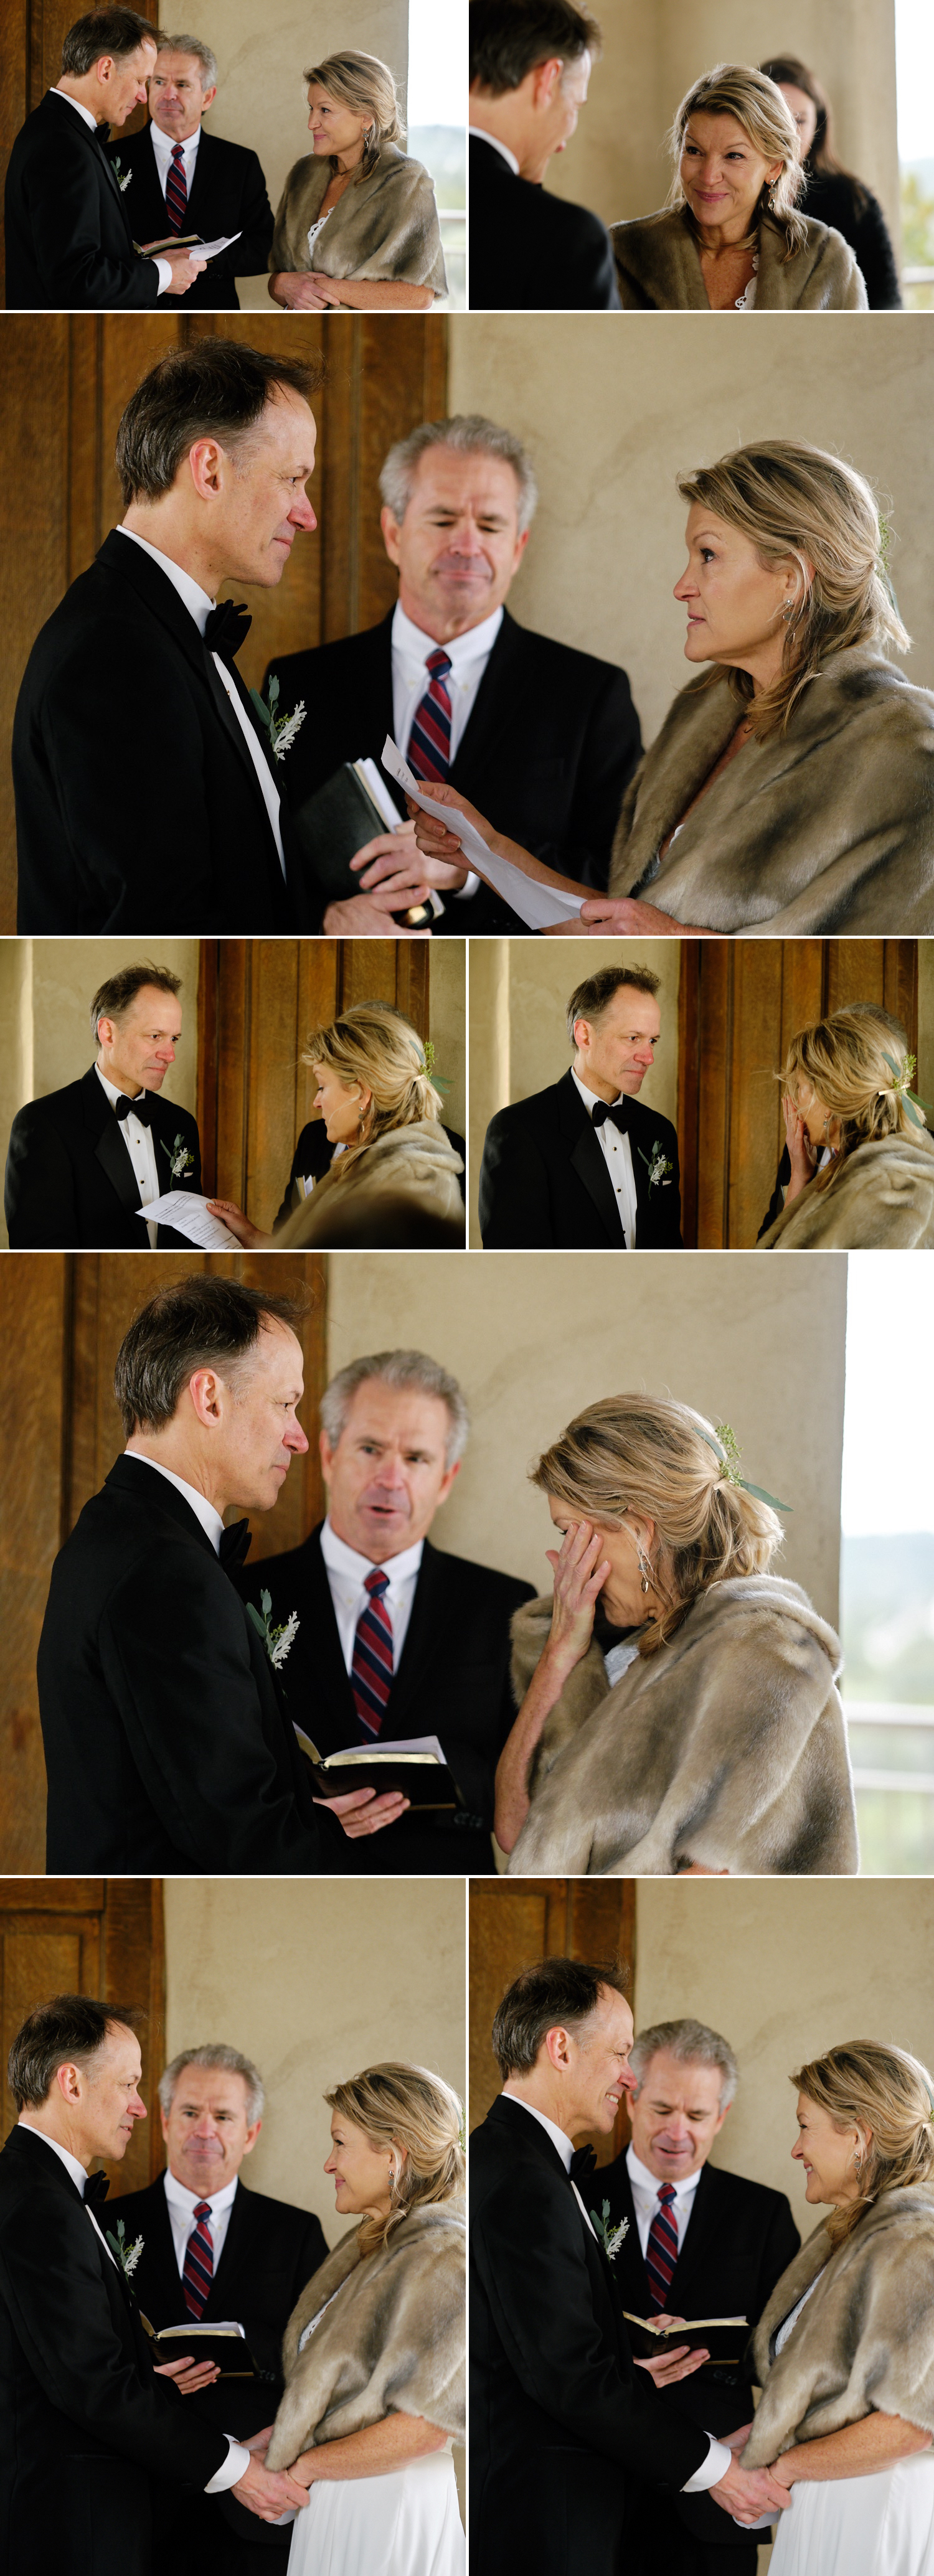 Emotional wedding vows exchanged between Amy and Martin | destination wedding photographers Mercedes Morgan Photography